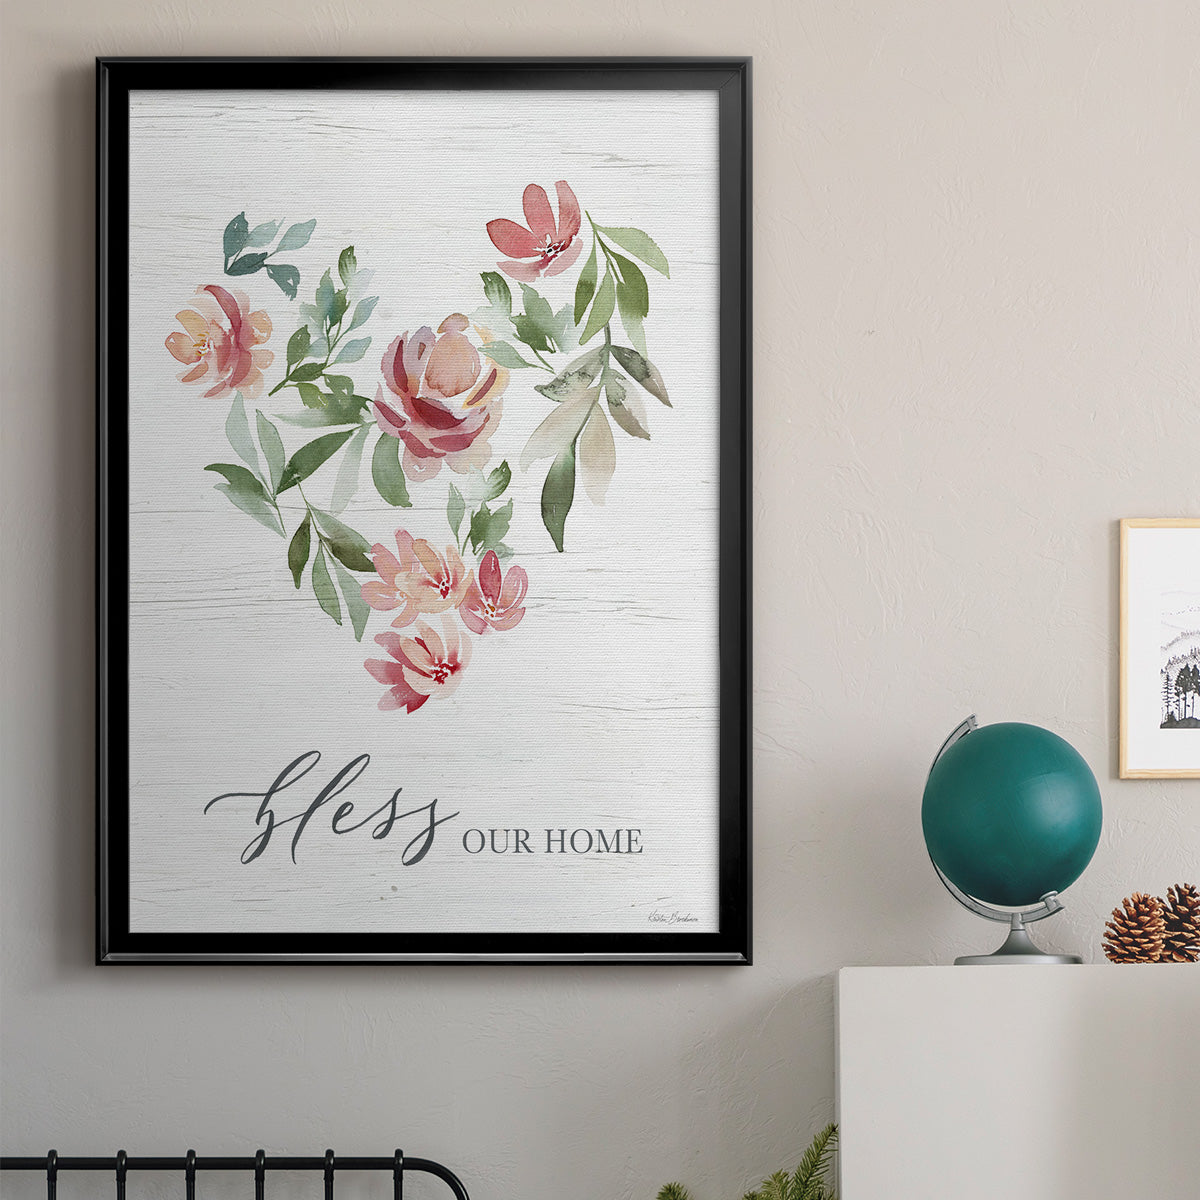 Paradise Floral Heart Premium Framed Print - Ready to Hang